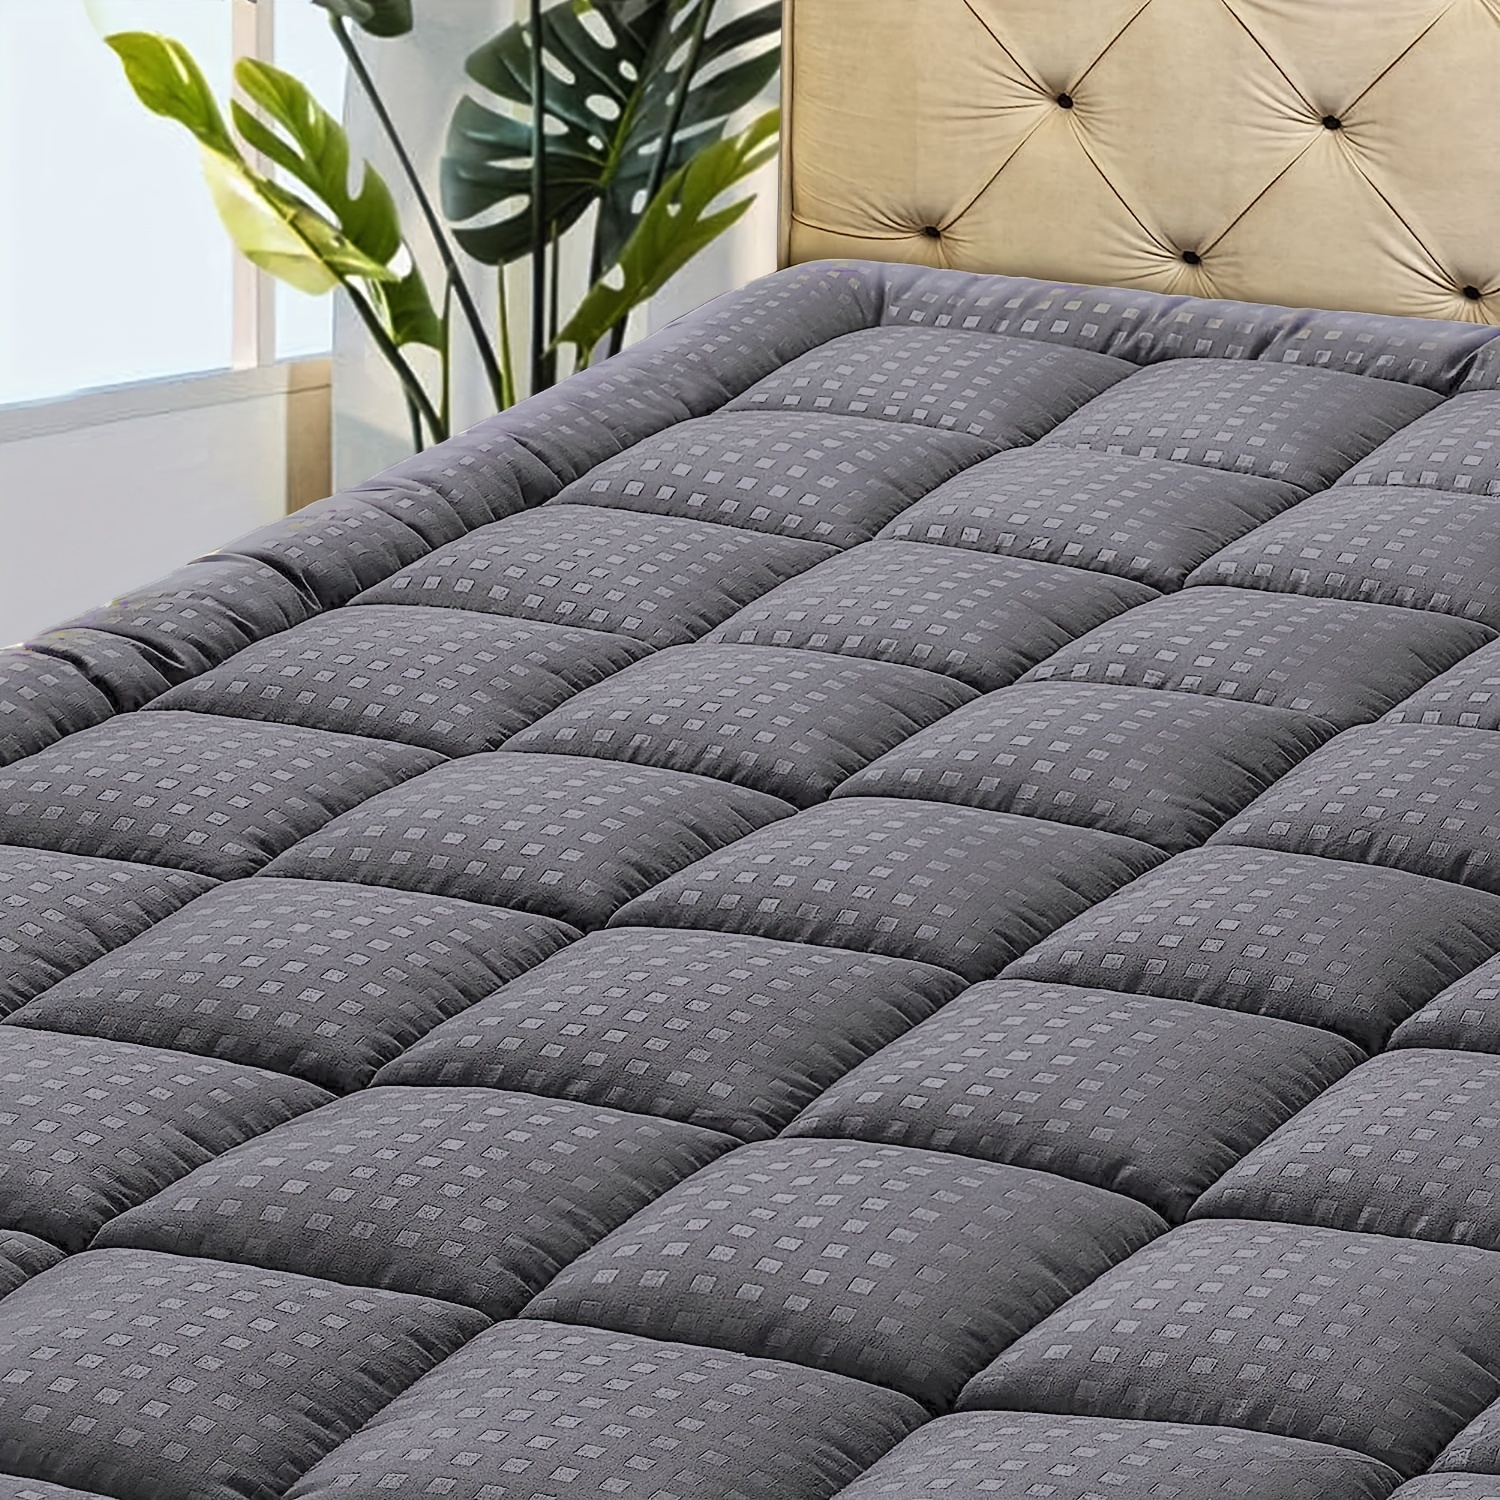 Buy a Cooling Mattress Cover & Protector